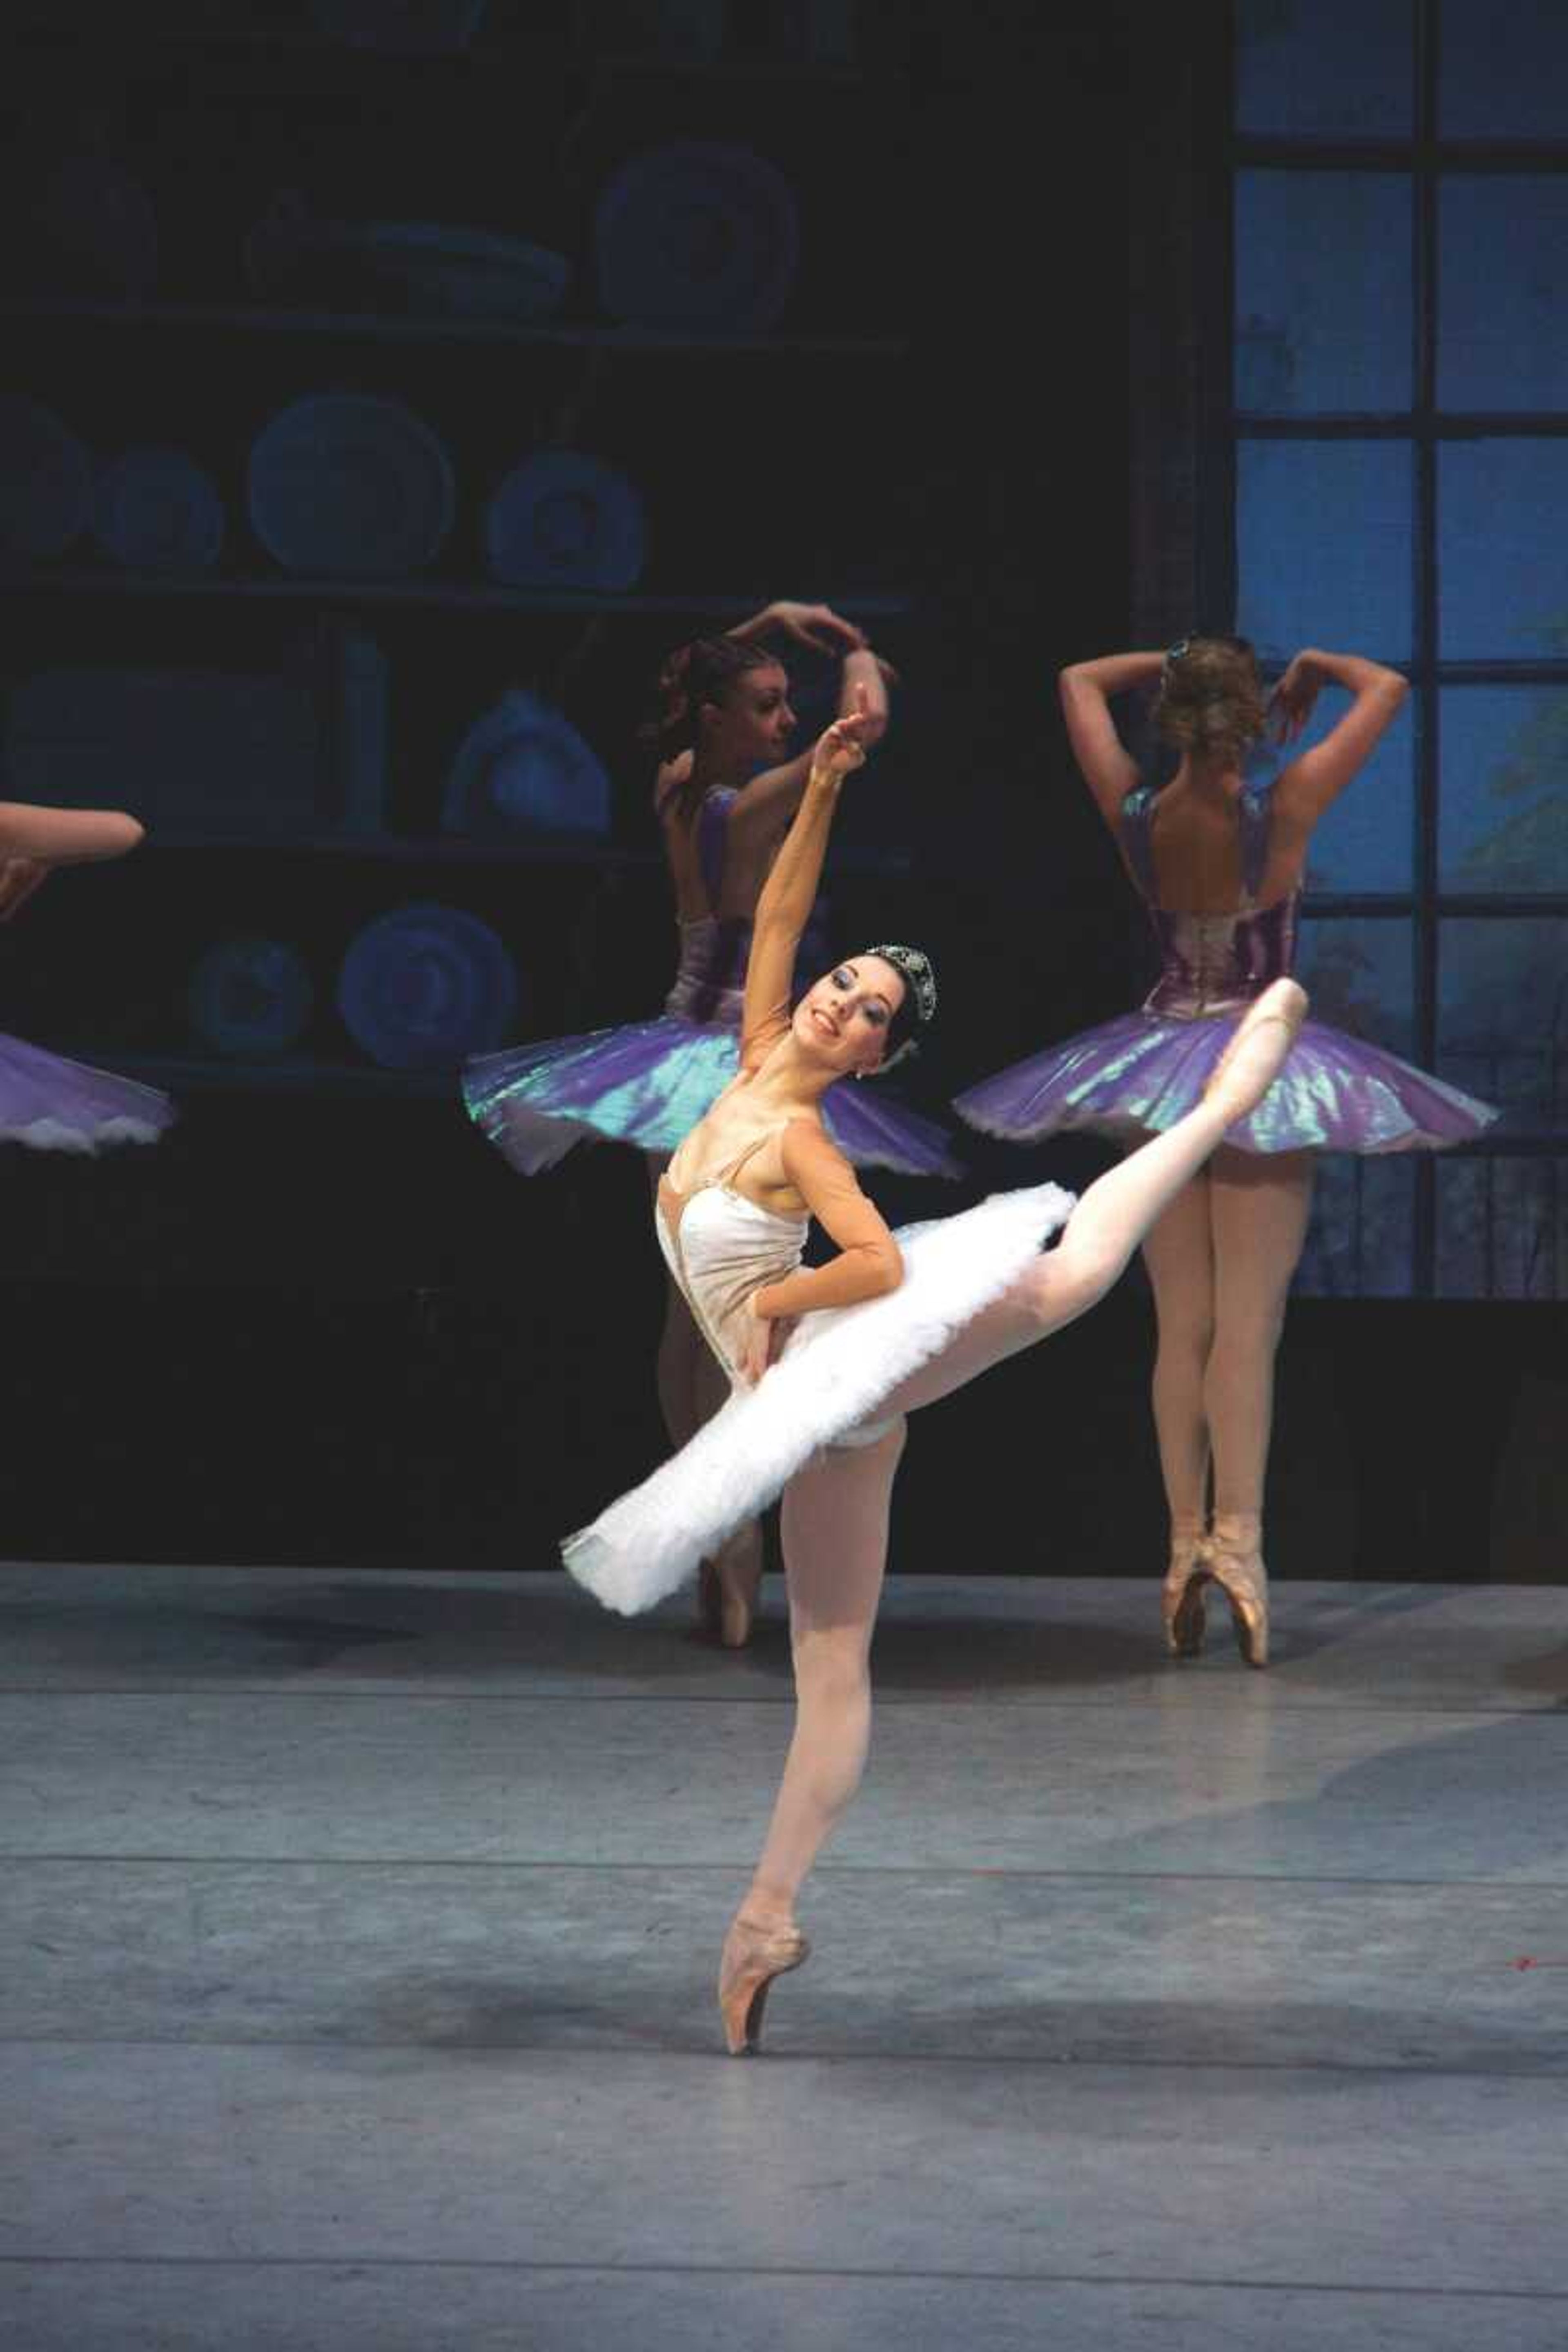 Russian ballet group to take Bedell stage